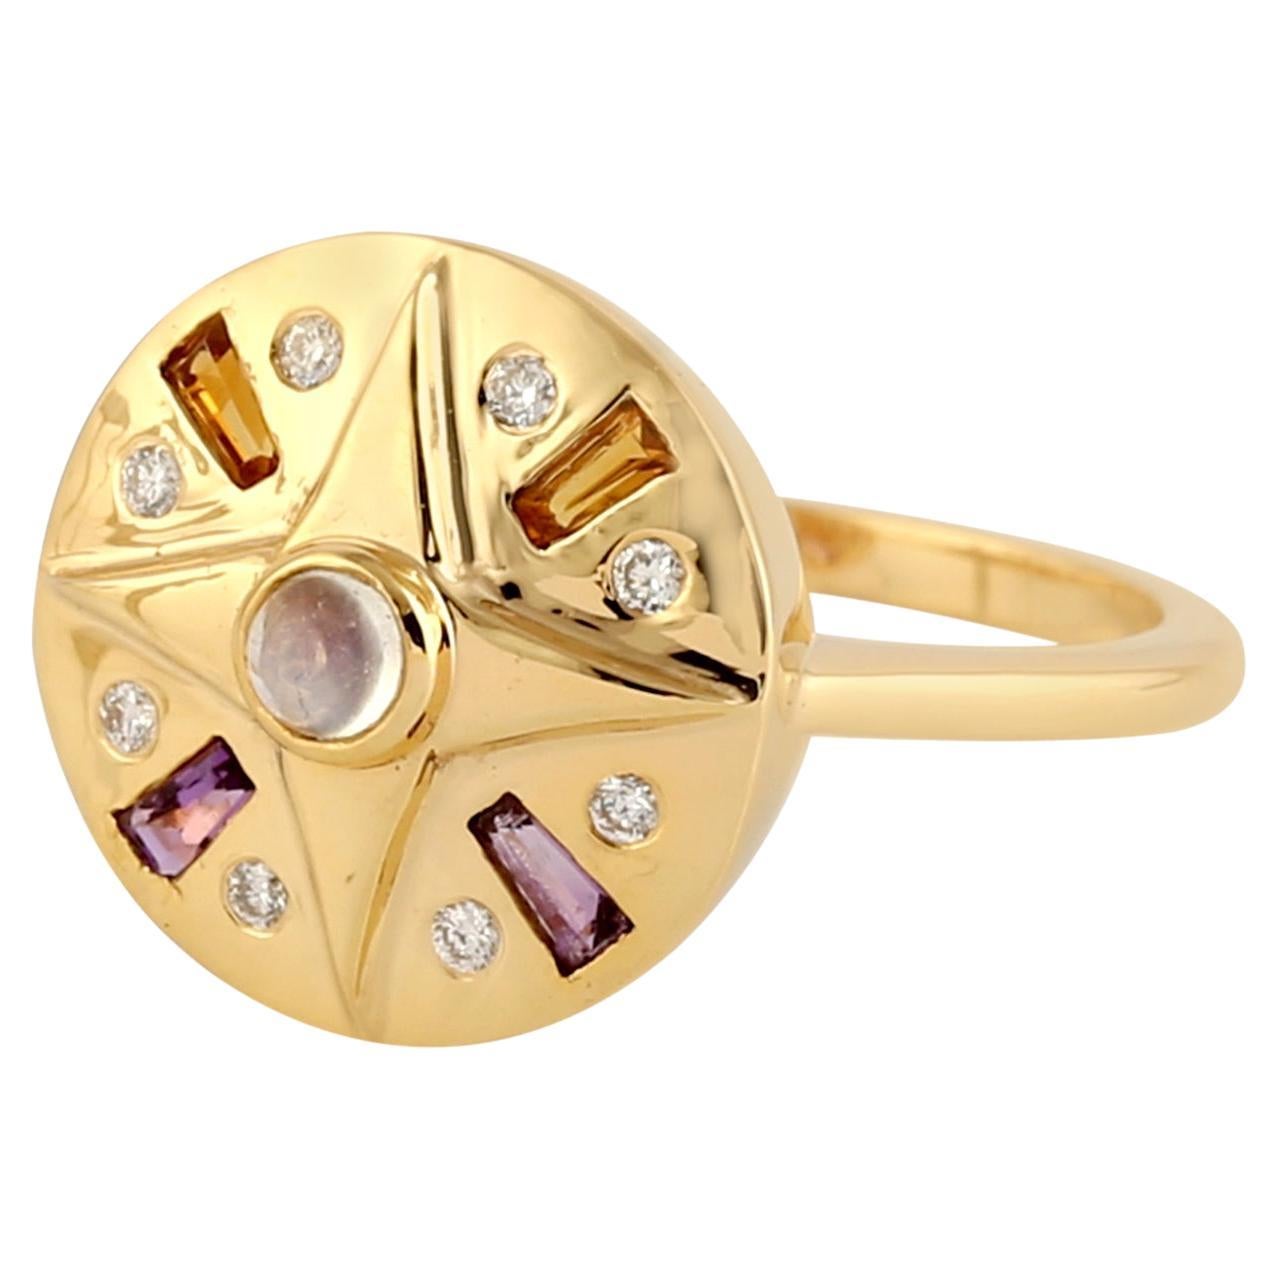 Multi Gemstone & Diamond Ring With Star Shape In Center Made In 18k Yellow Gold For Sale